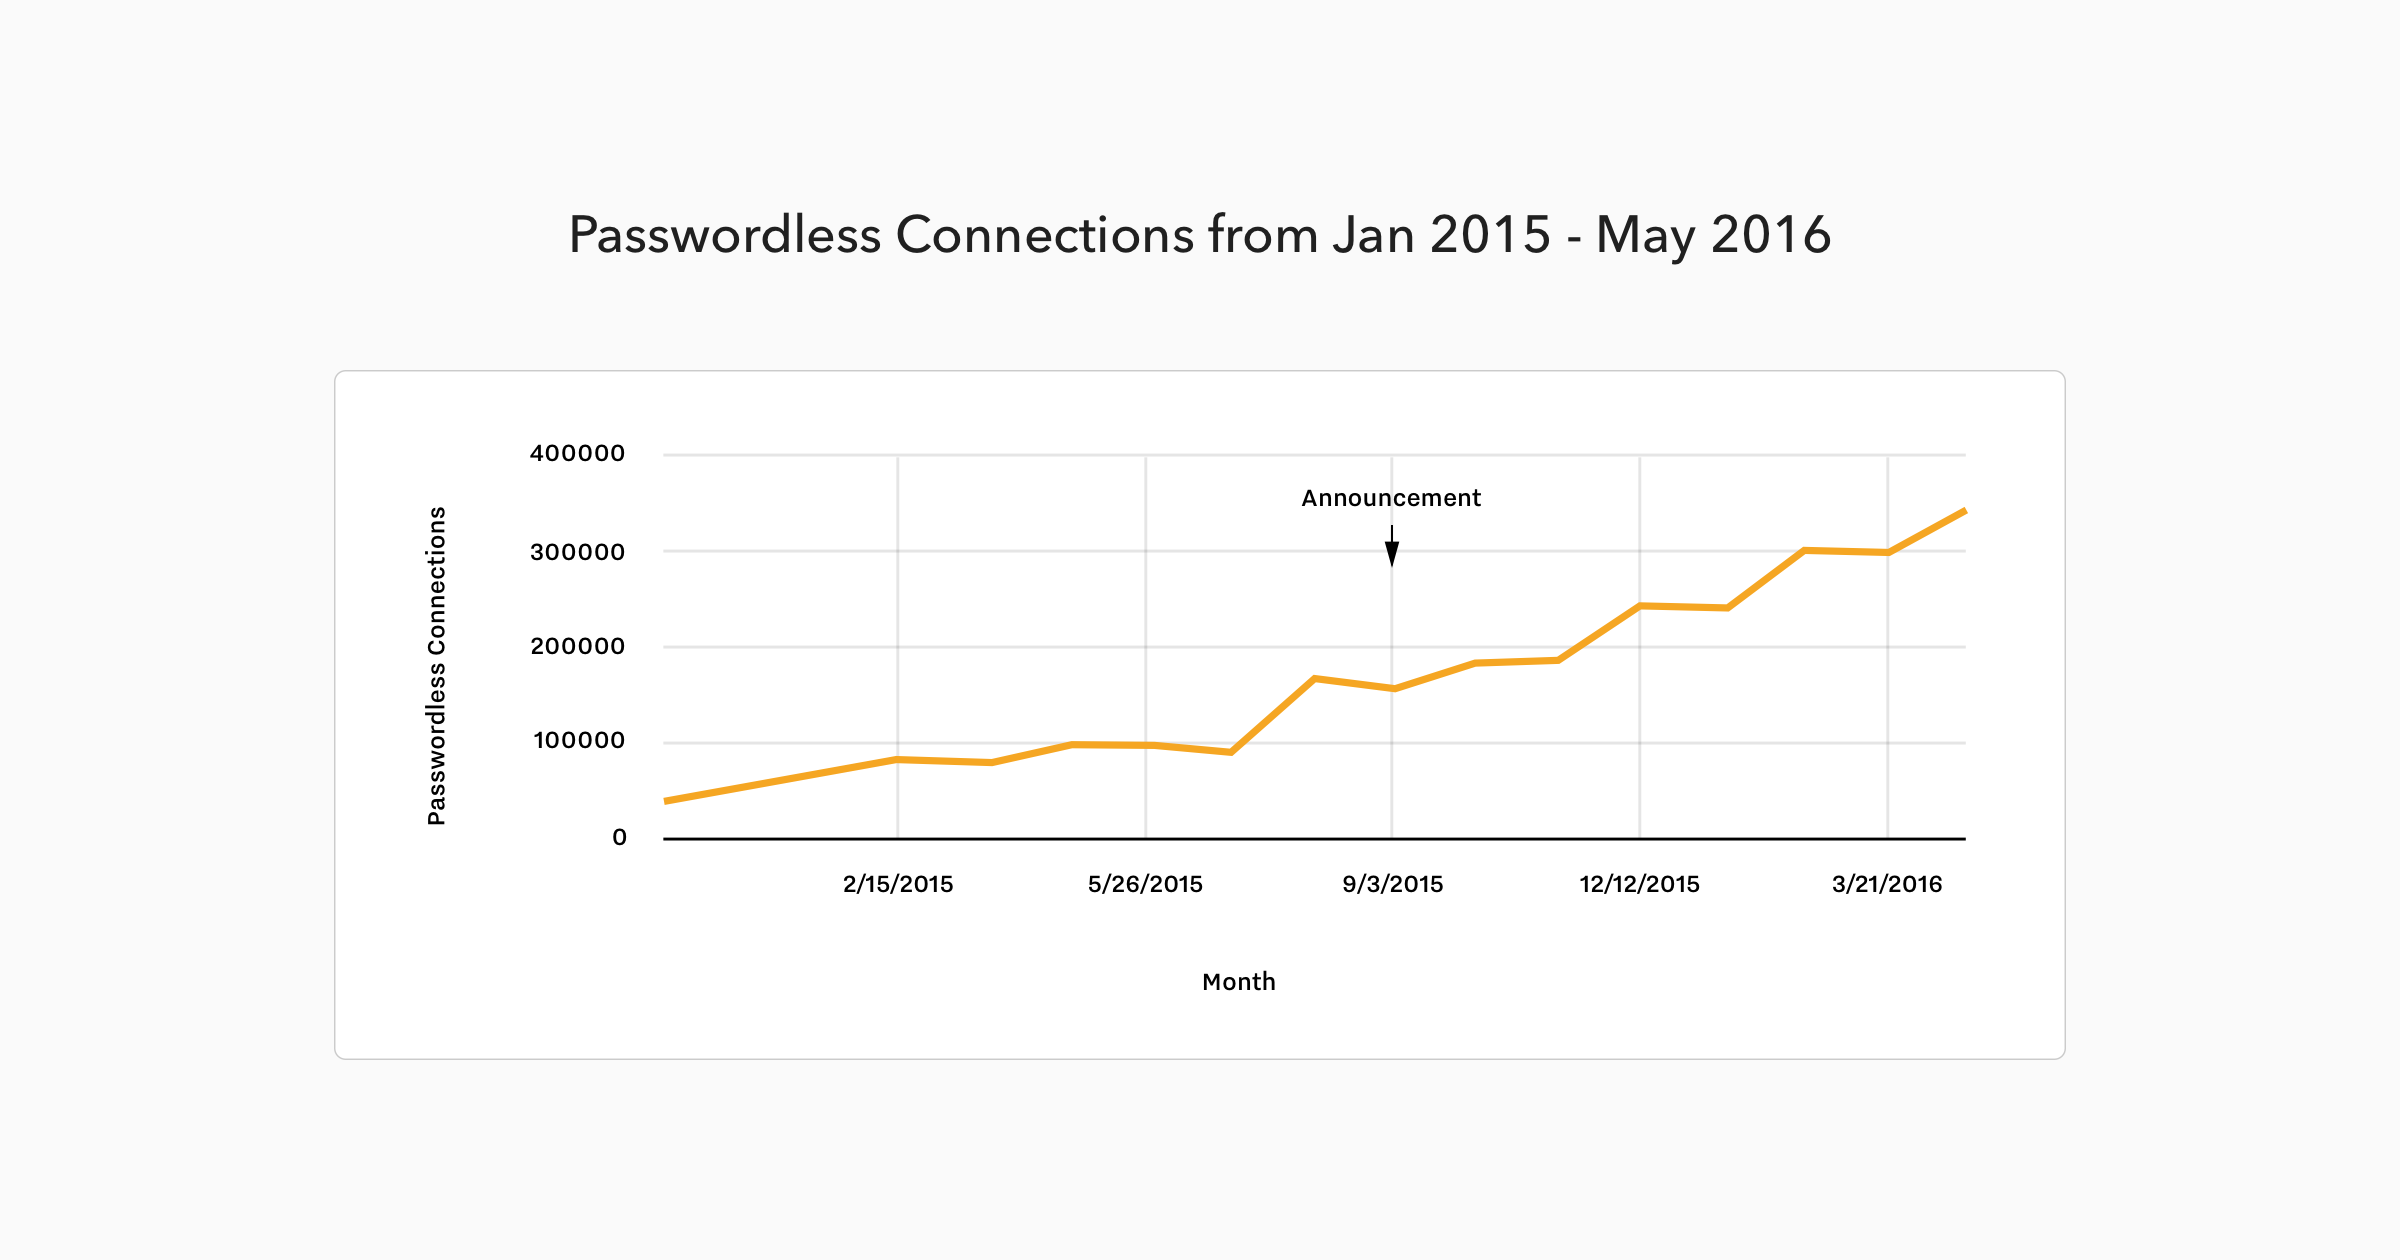 Passwordless Connections